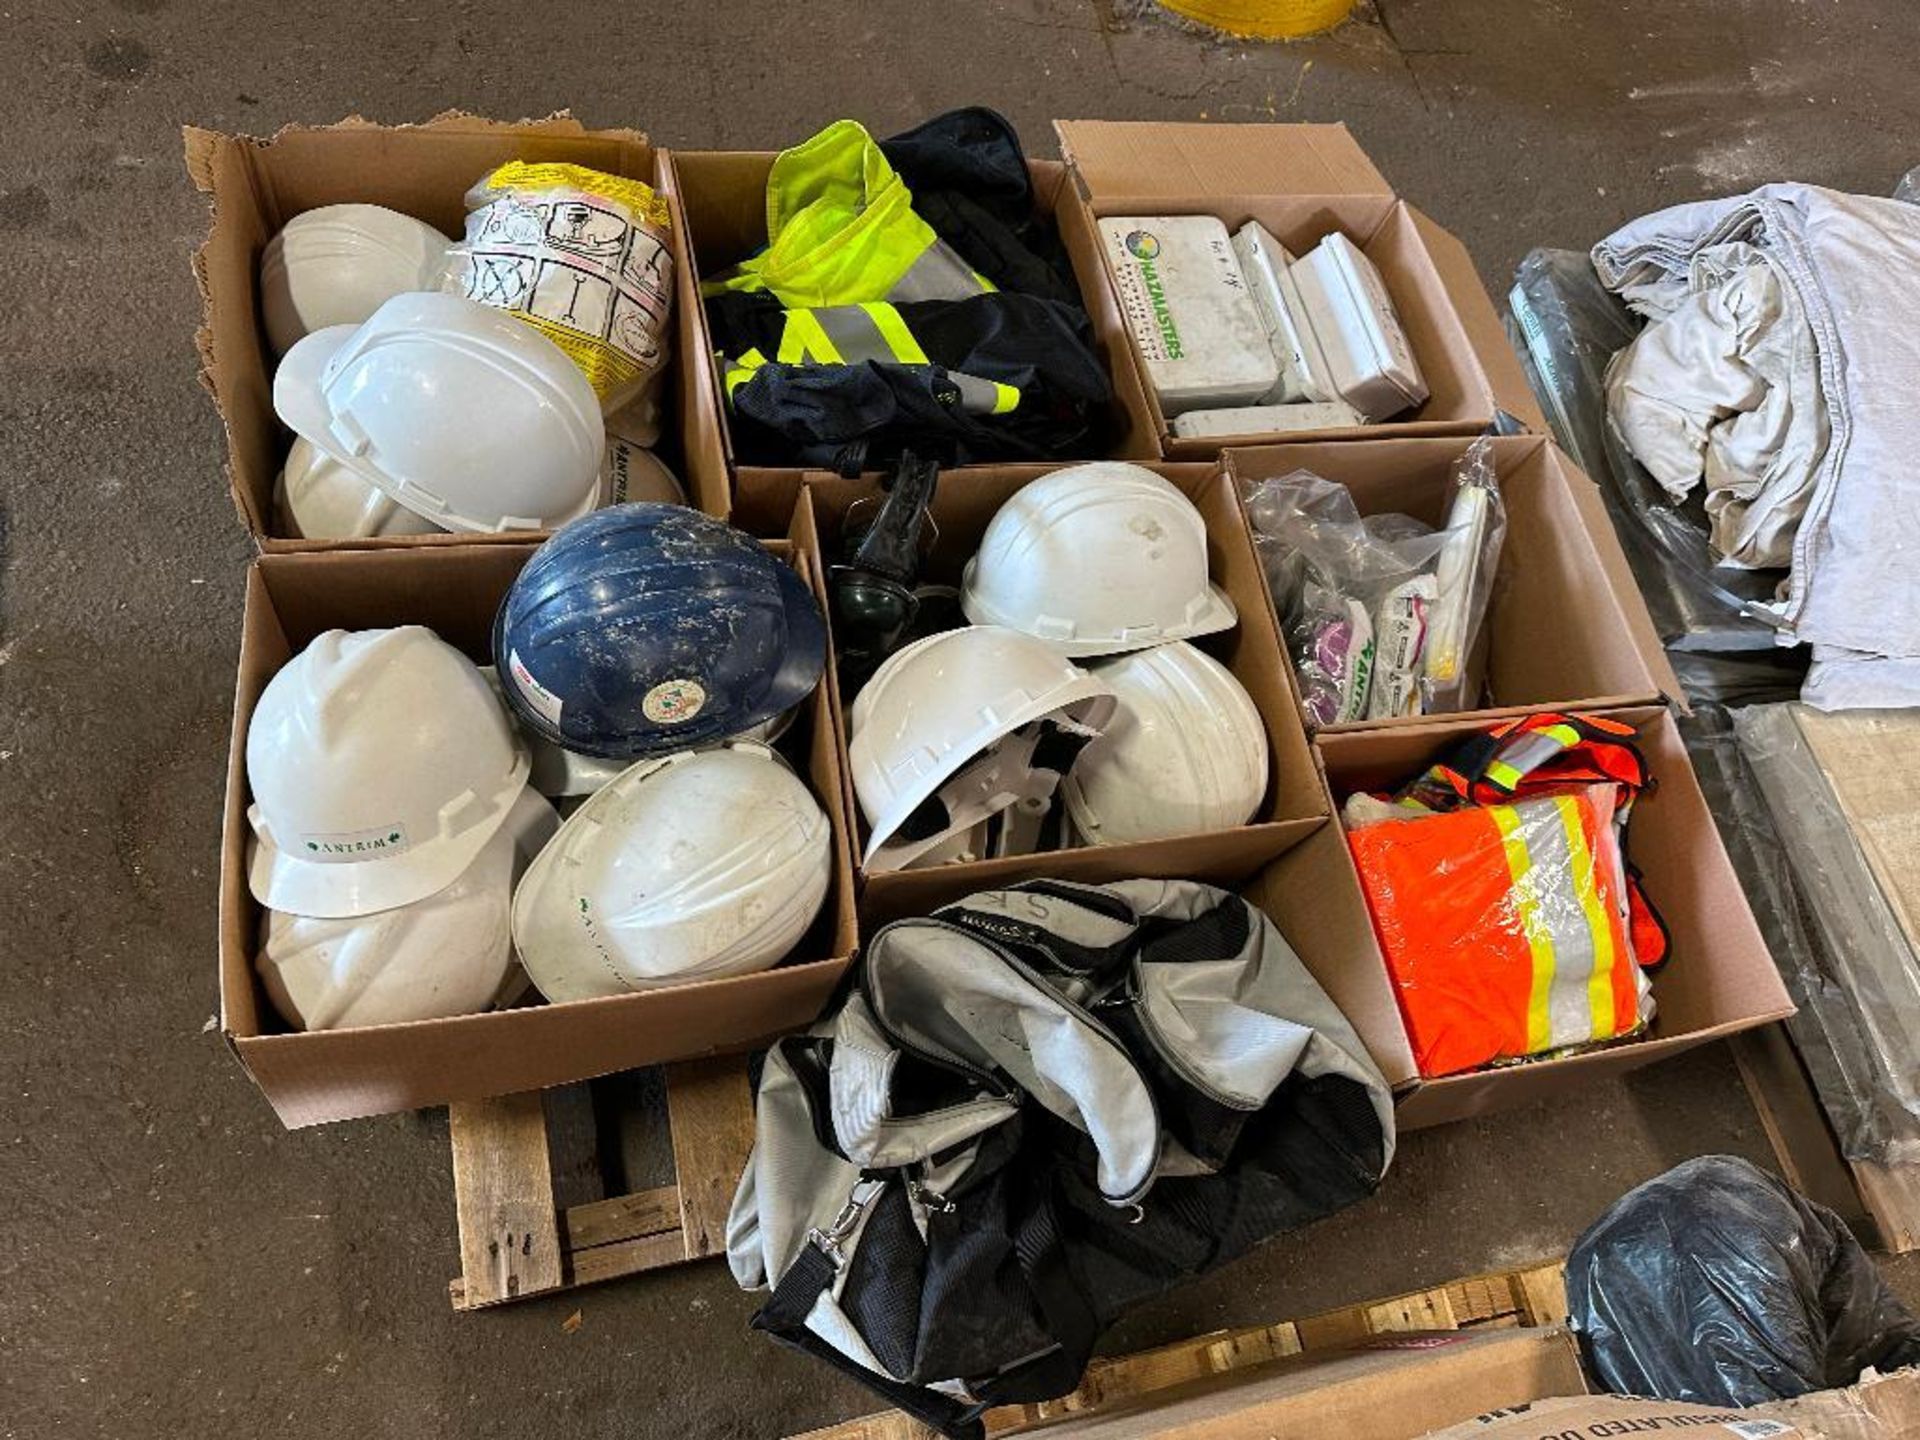 Lot of Asst. Hard Hats, Safety Vests, First Aid Kits, etc. - Image 2 of 4